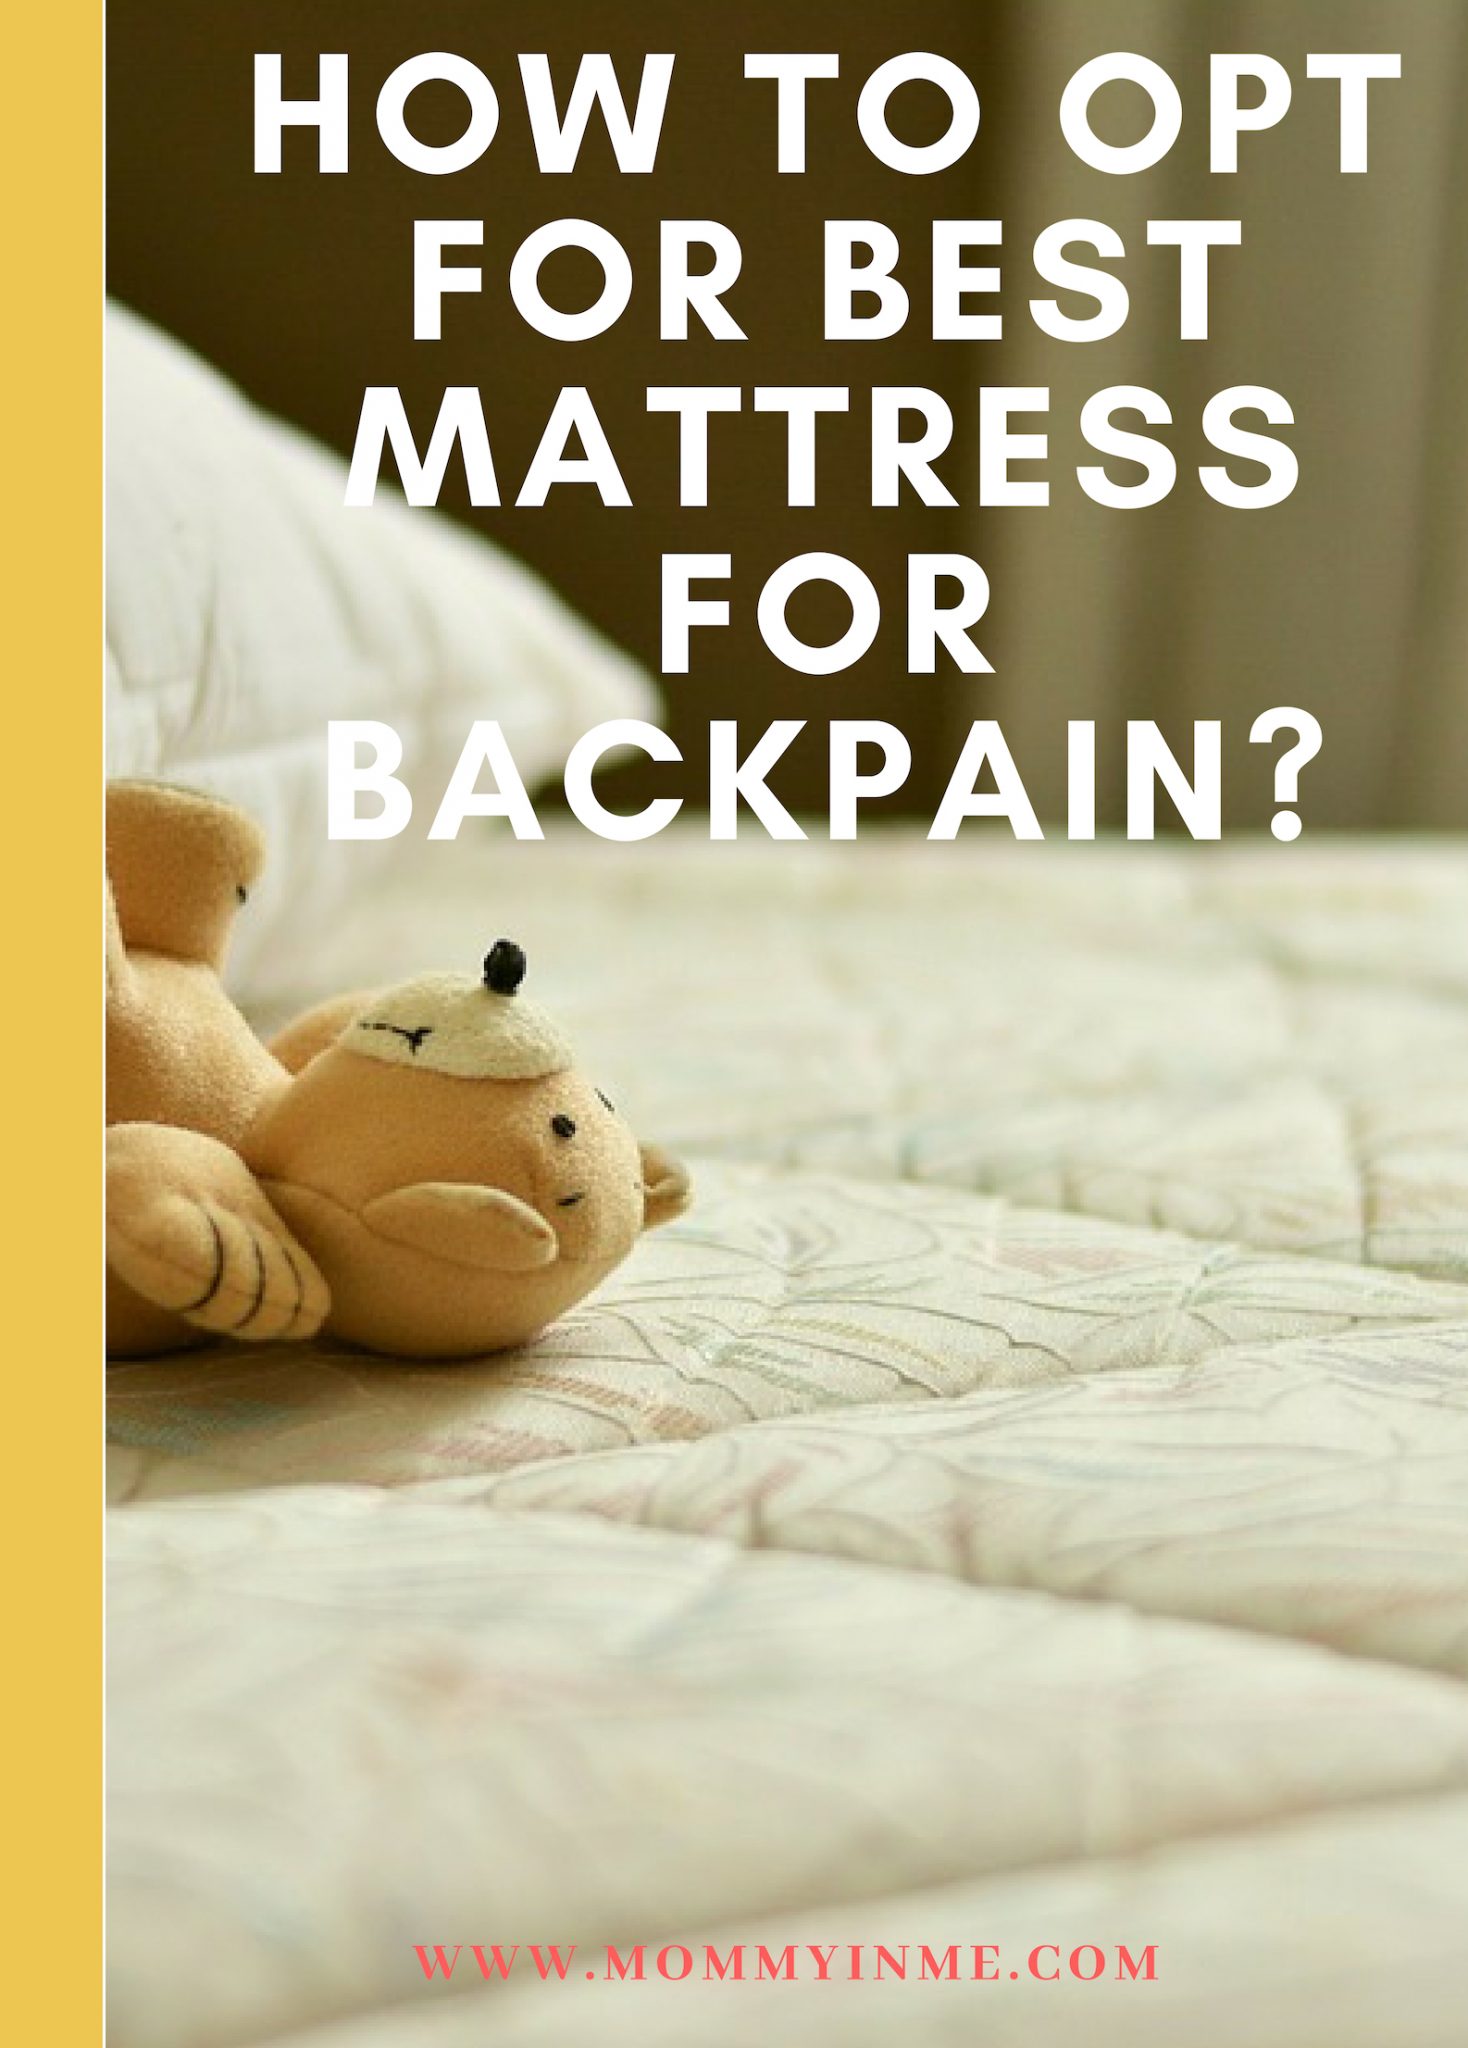 Did you know that people who wake up with back pain are due to sleeping on a poor quality mattress? This chronic pain is completely avoidable if you are selecting the best mattress for back pain. here are some Mattress features to look for if you have backpain and poor quality sleep. Firmness, support system, type of foam matters a lot while selecting a mattress. Read more #mattress #backpain #wakefit #bestmattress #sleep #sleepquality 